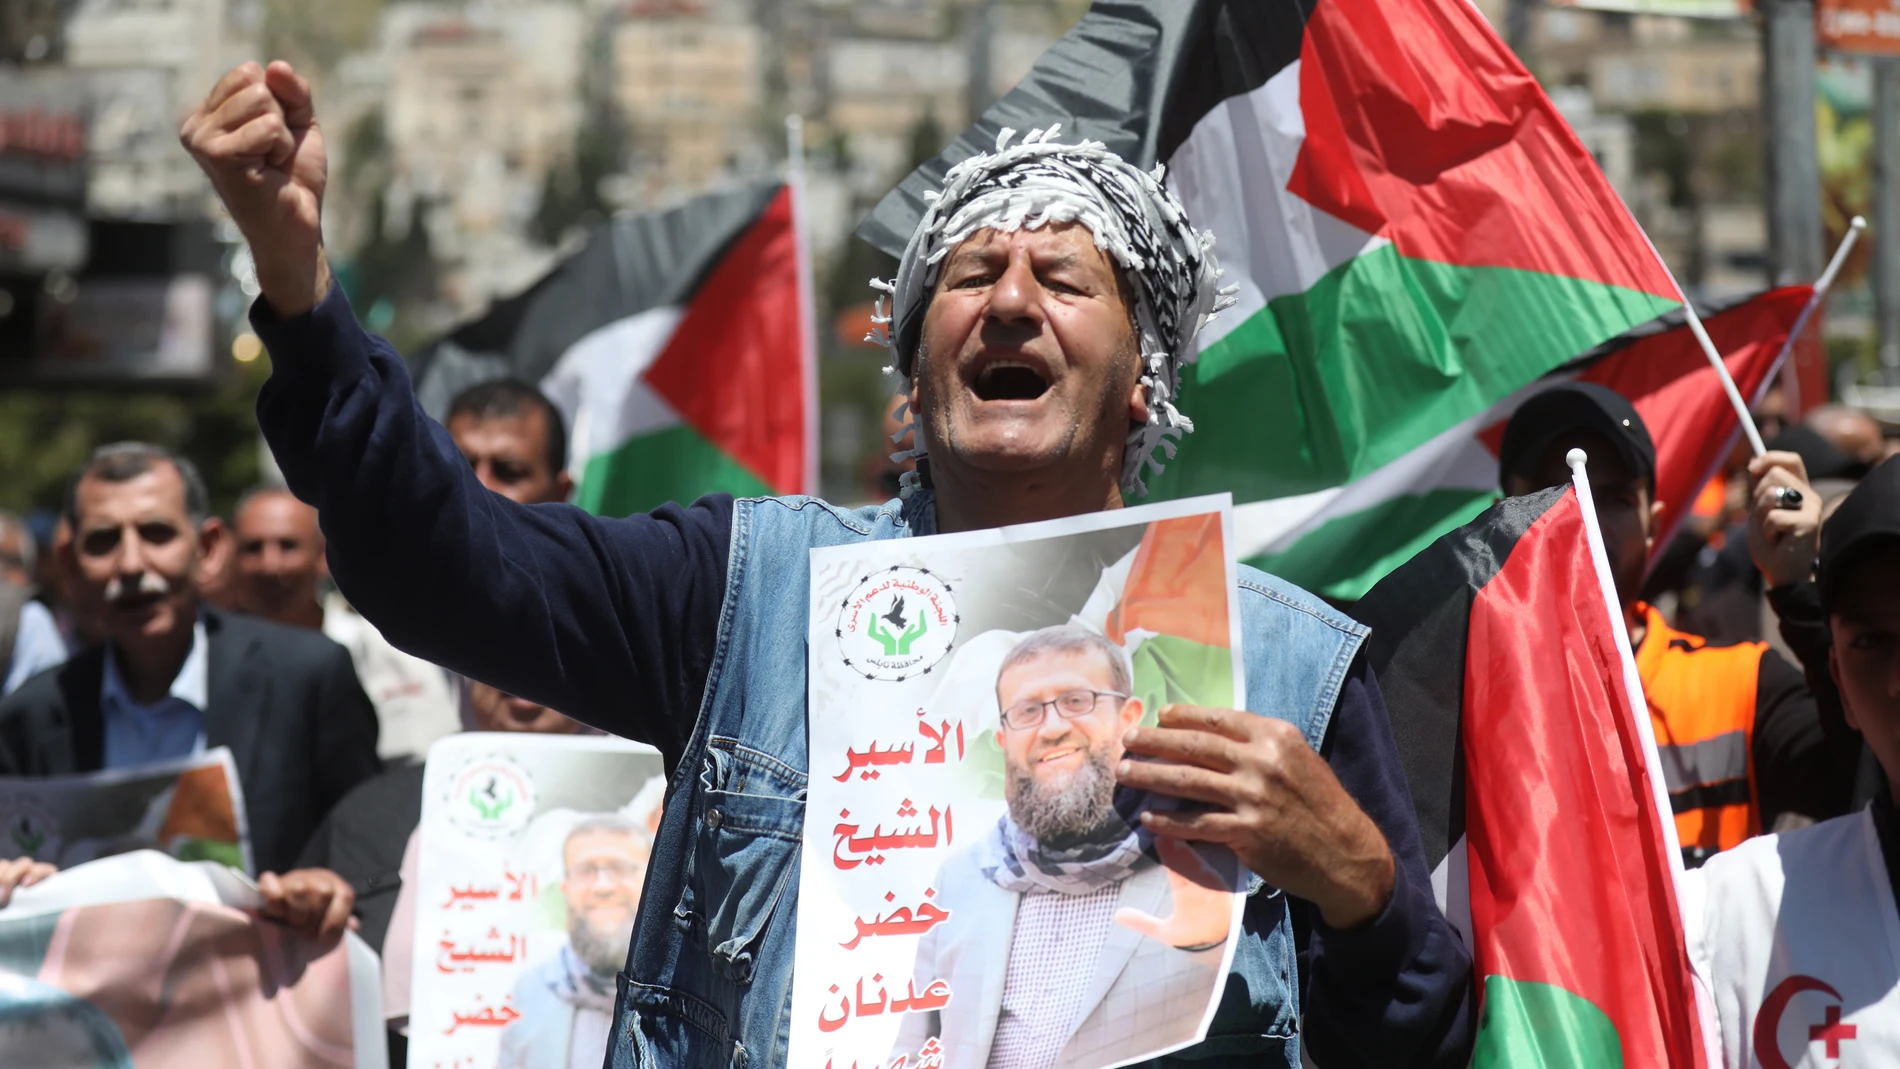 Nablus (-), 02/05/2023.- People protest following the death in an Israeli jail of Palestinian Islamic Jihad member Khader Adnan, in the West Bank City of Nablus, 02 May 2023. The Palestinian Prisoners Club confirmed that Adnan died on 02 May 2023 in an Israeli prison following more than 85 days of hunger strike, refusing administrative detention. (Protestas) EFE/EPA/ALAA BADARNEH 